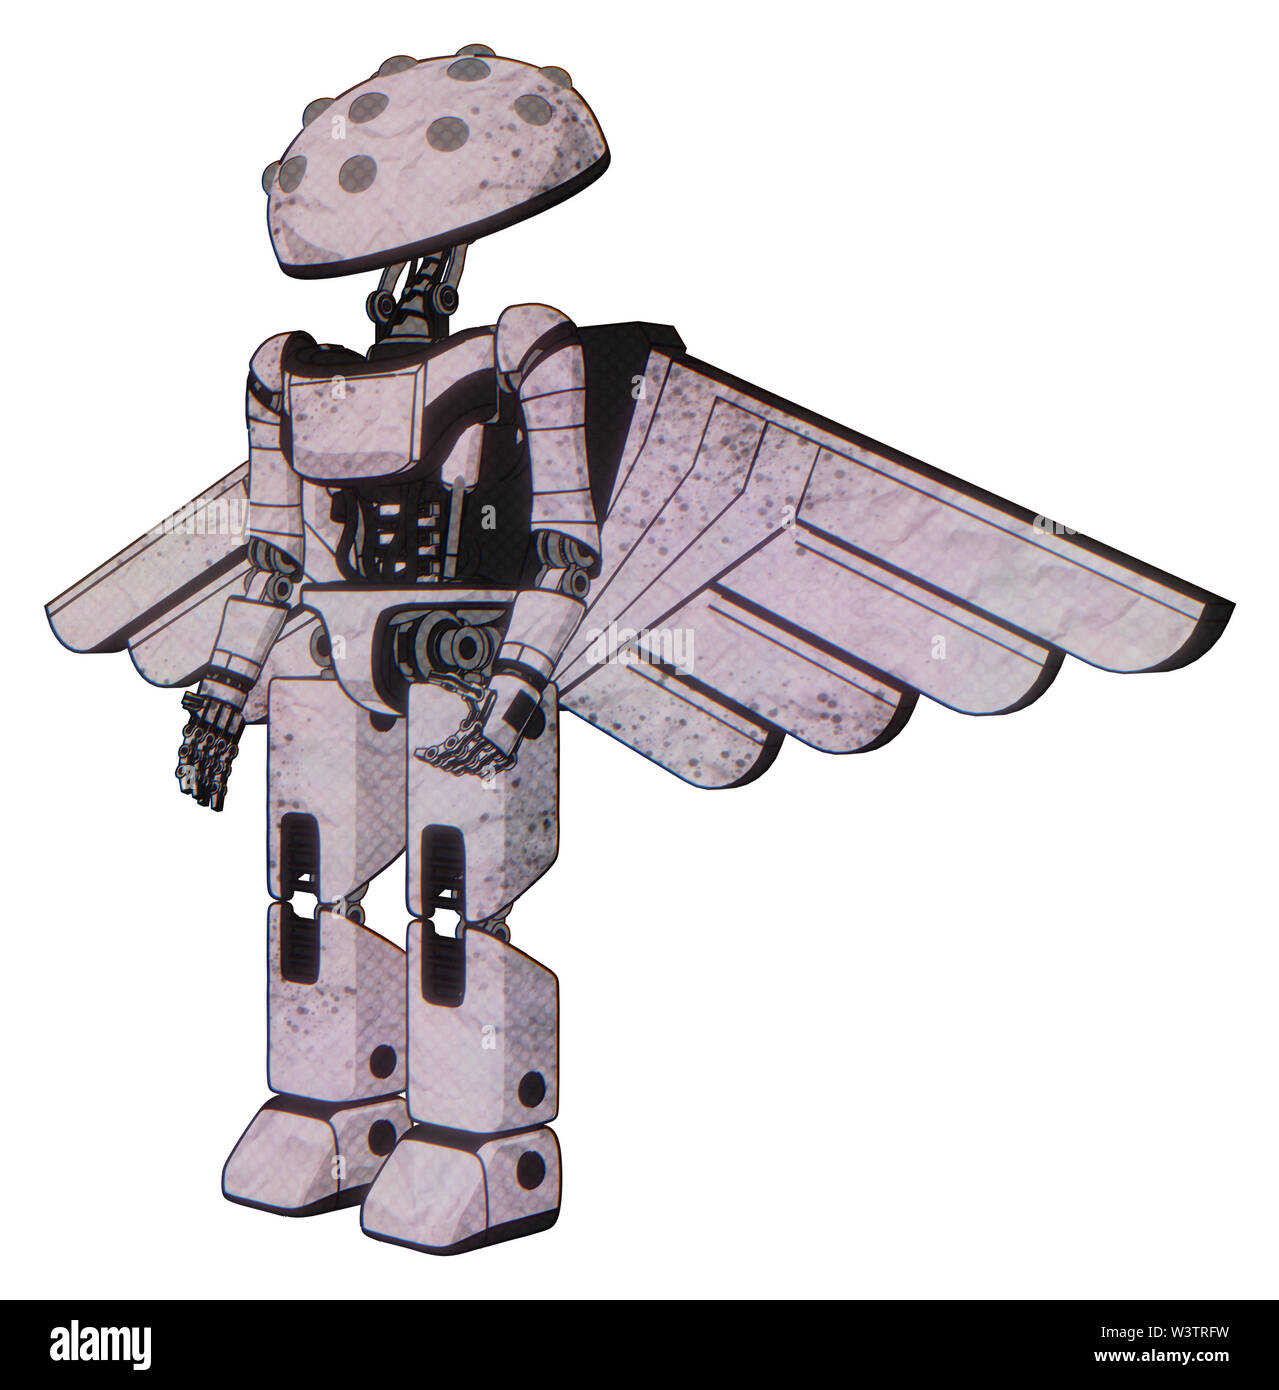 Robot containing elements: metal knucklehead design, light chest exoshielding, ultralight chest exosuit, pilot's wings assembly, prototype exoplate... Stock Photo